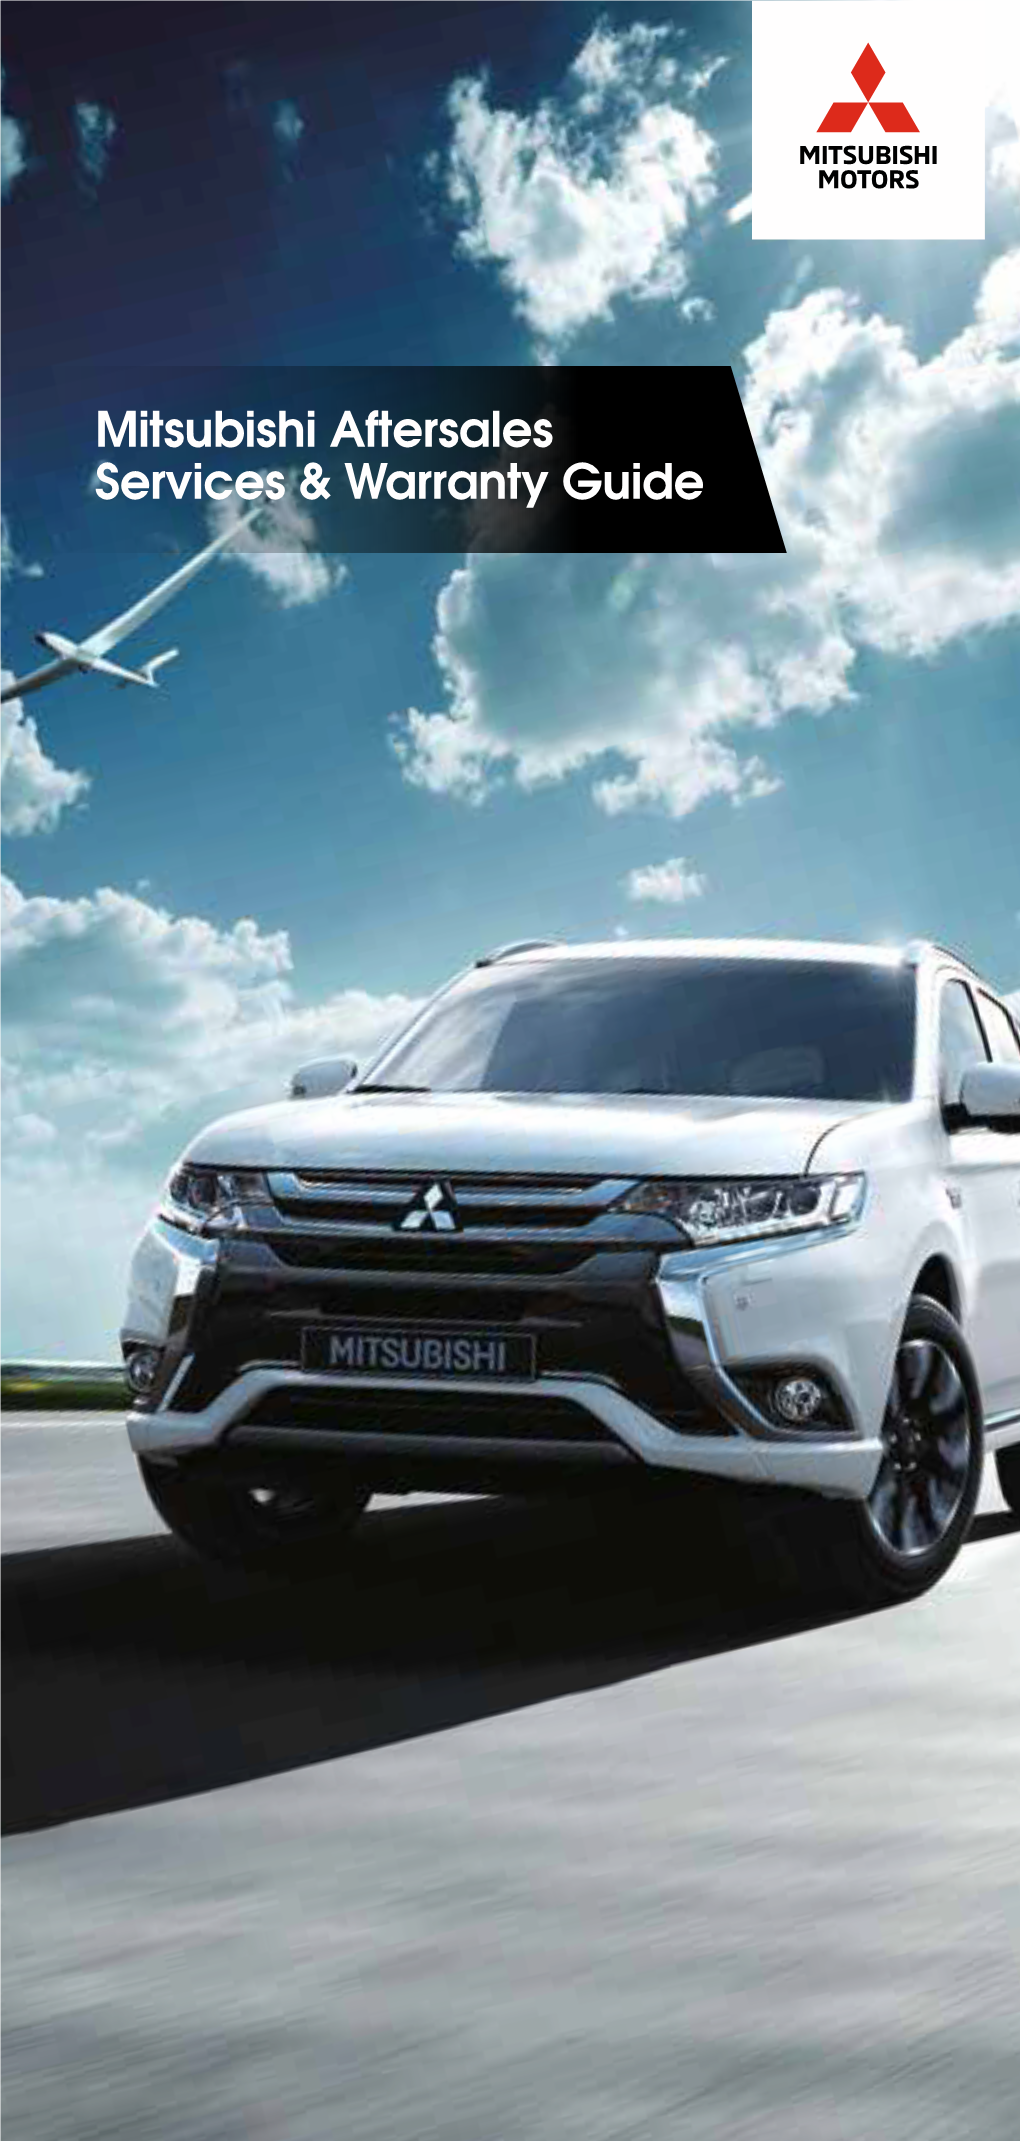 Mitsubishi Aftersales Services & Warranty Guide